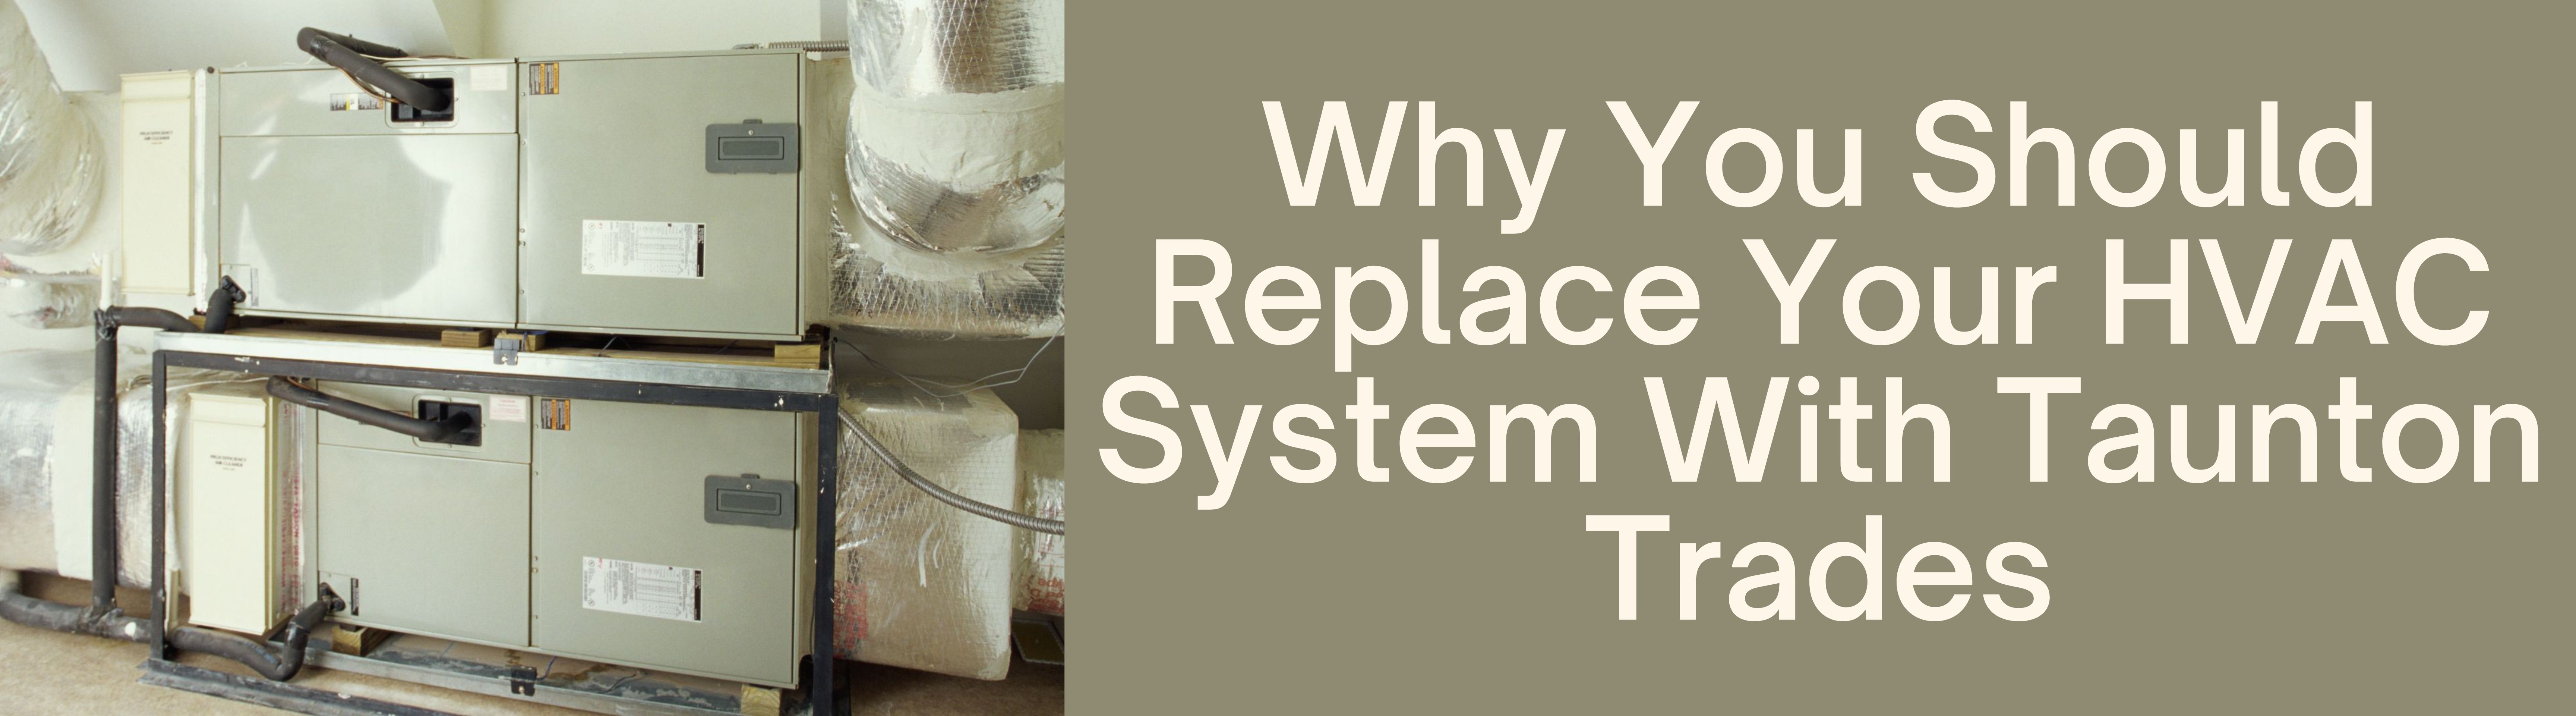 Image for Why You Should Replace Your HVAC System With Taunton Trades